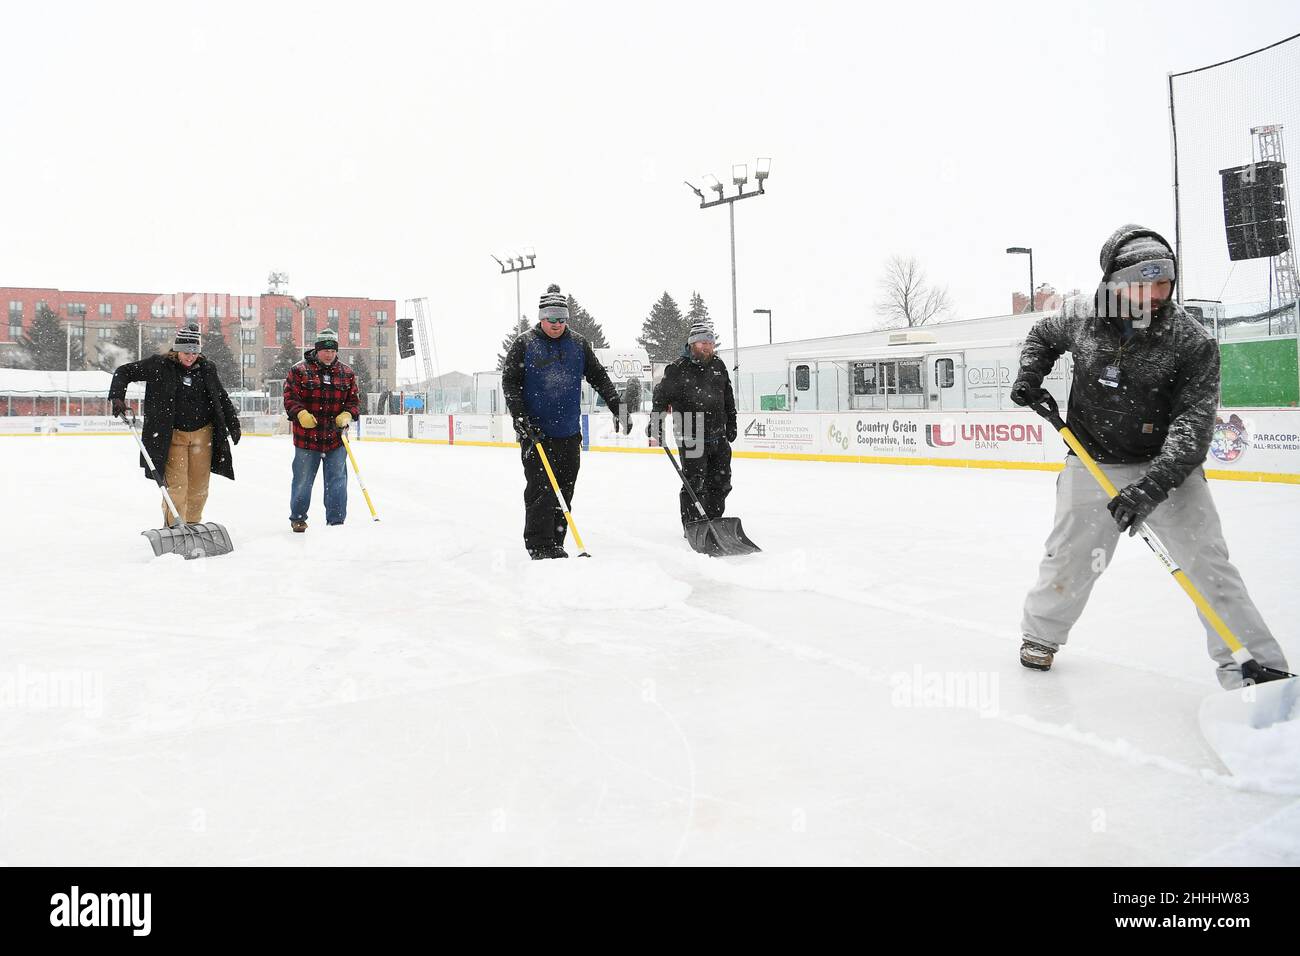 Volunteers clear the ice between games of the 3rd annual Hockey Day North Dakota outdoor hockey event in Jamestown, ND. Youth, high school and college hockey teams from around North Dakota competed over two days. By Russell Hons/CSM Stock Photo